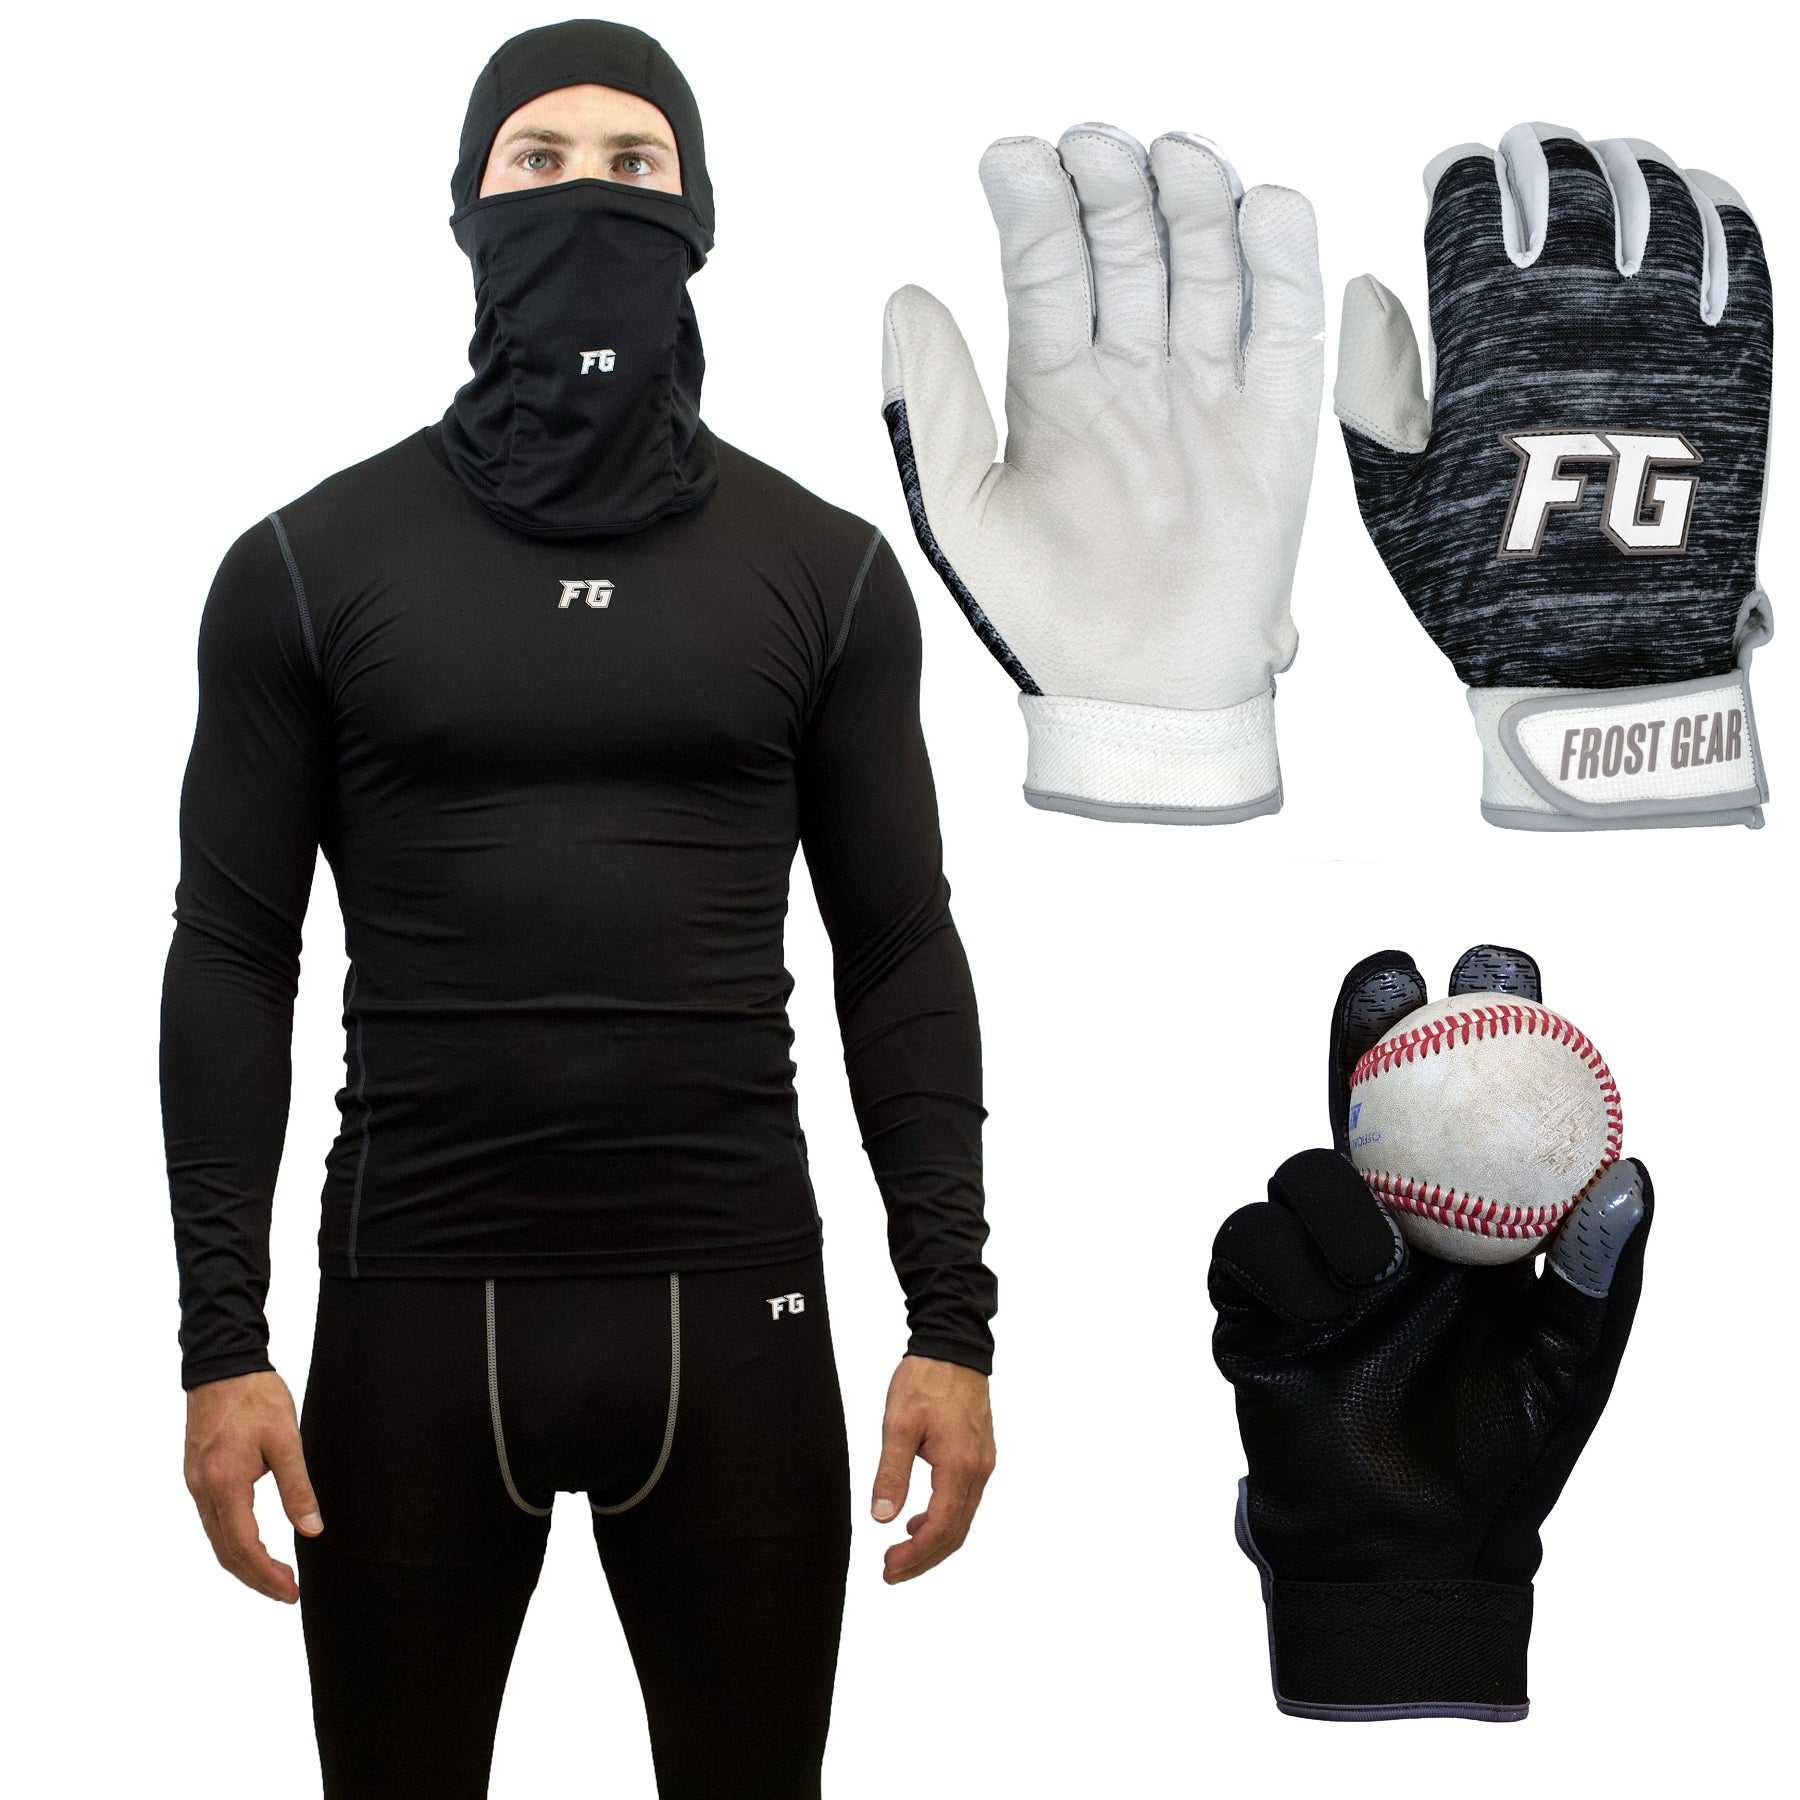 Cold weather gear for baseball 